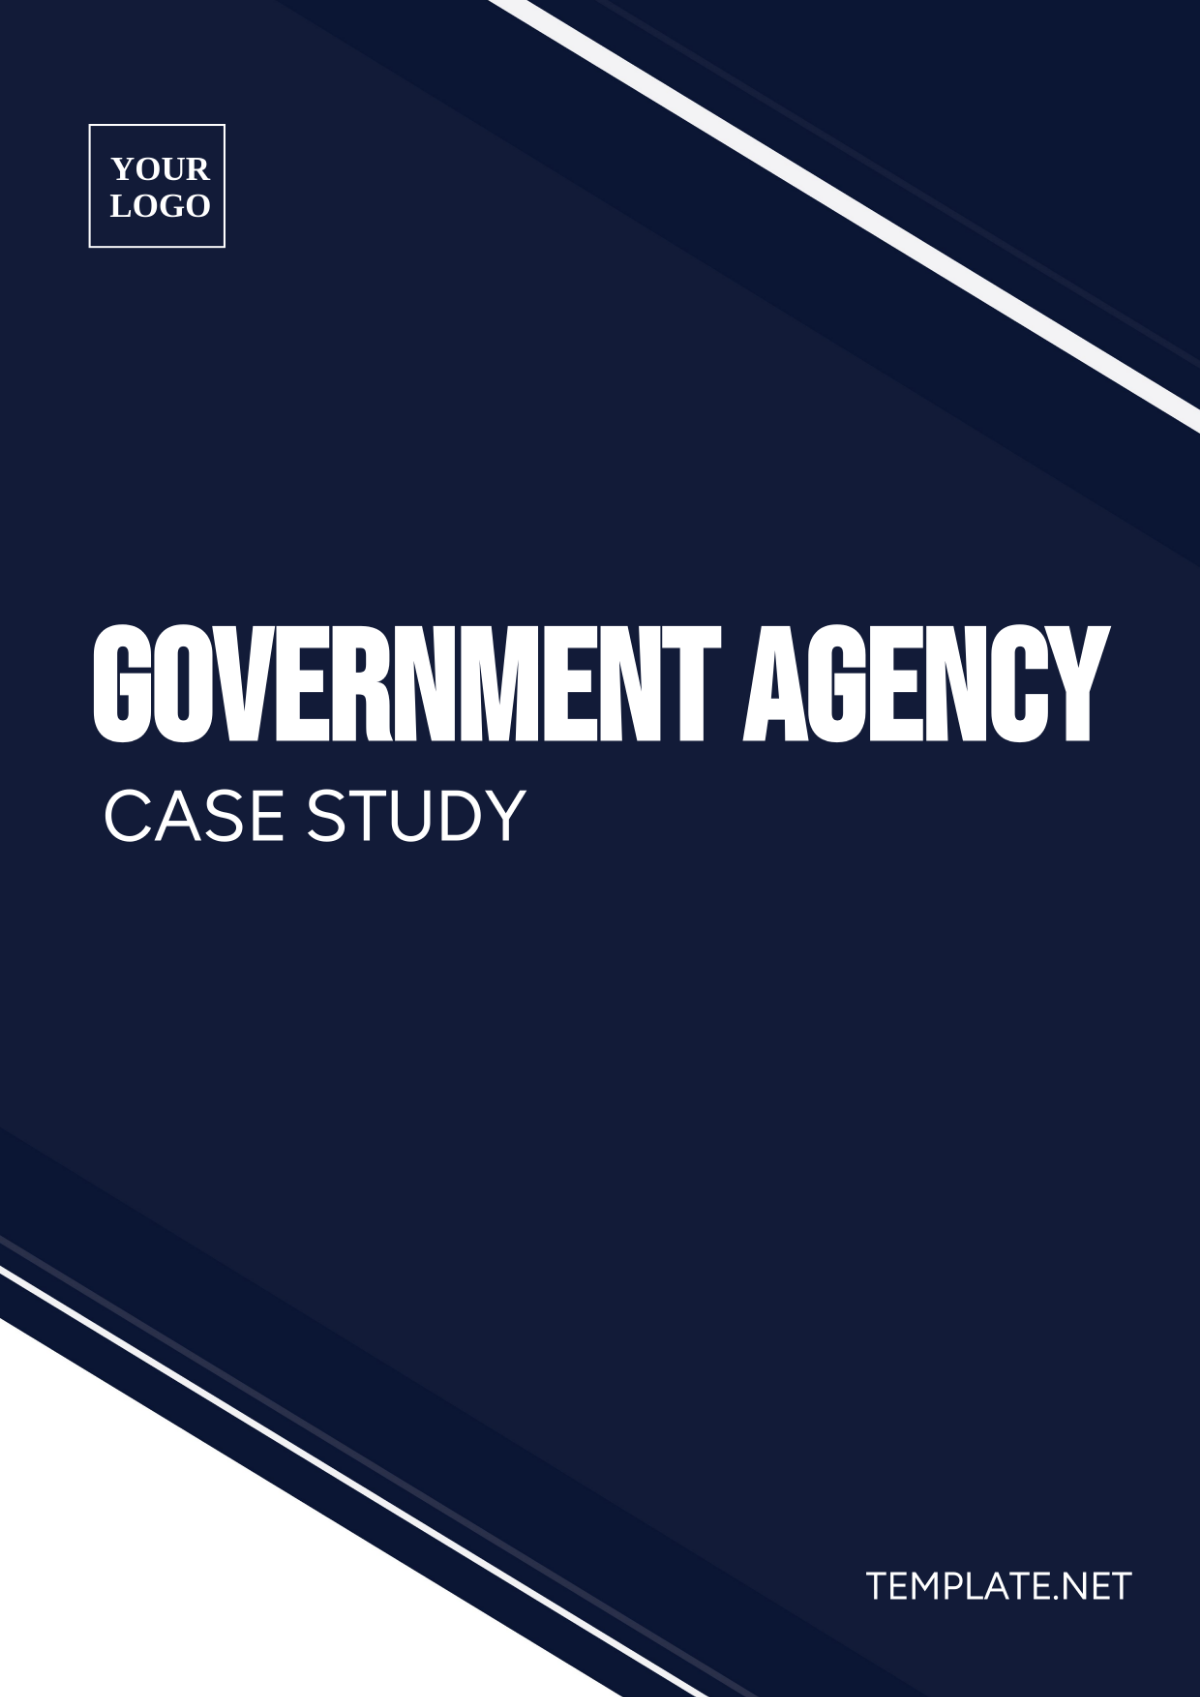 Government Agency Case Study Template